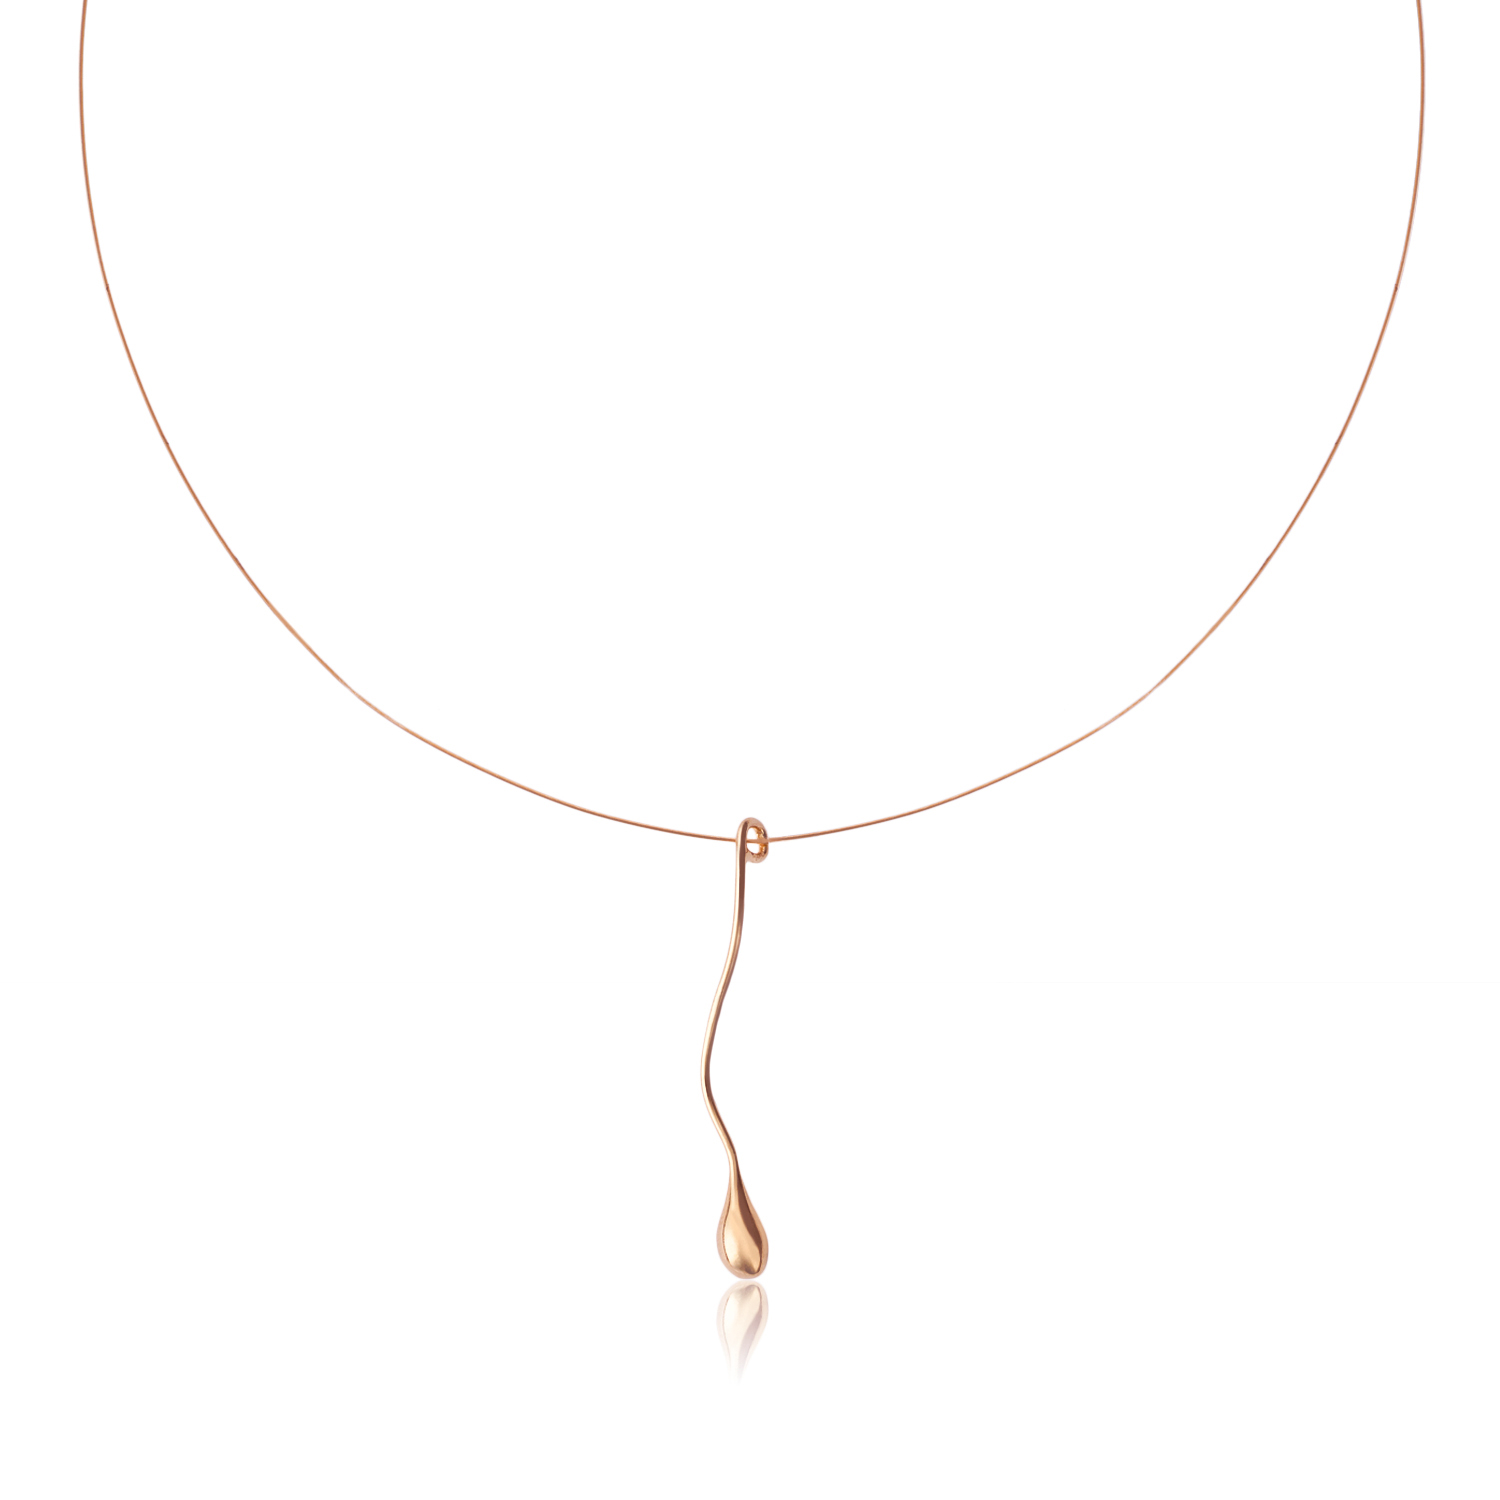 Olive oil drop pendant in 18k red gold